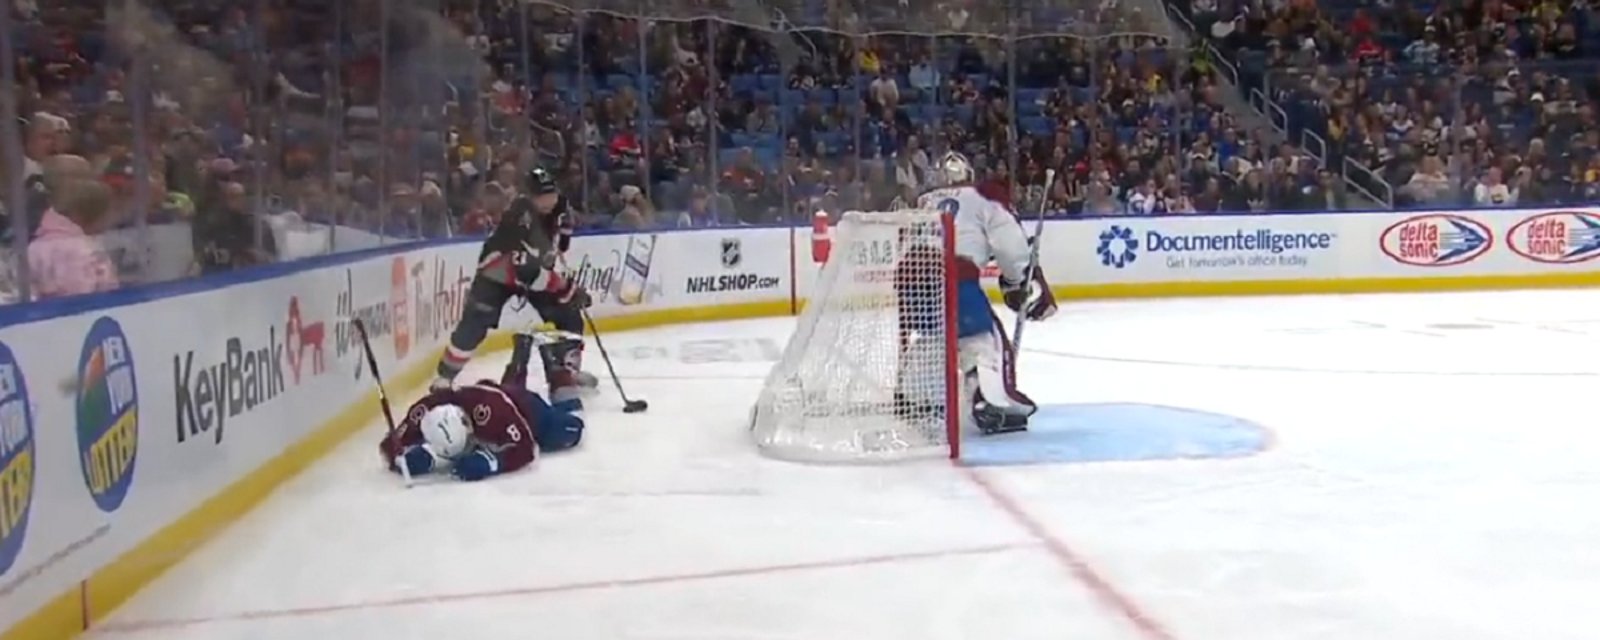 Kyle Okposo sends Cale Makar face first into the boards.